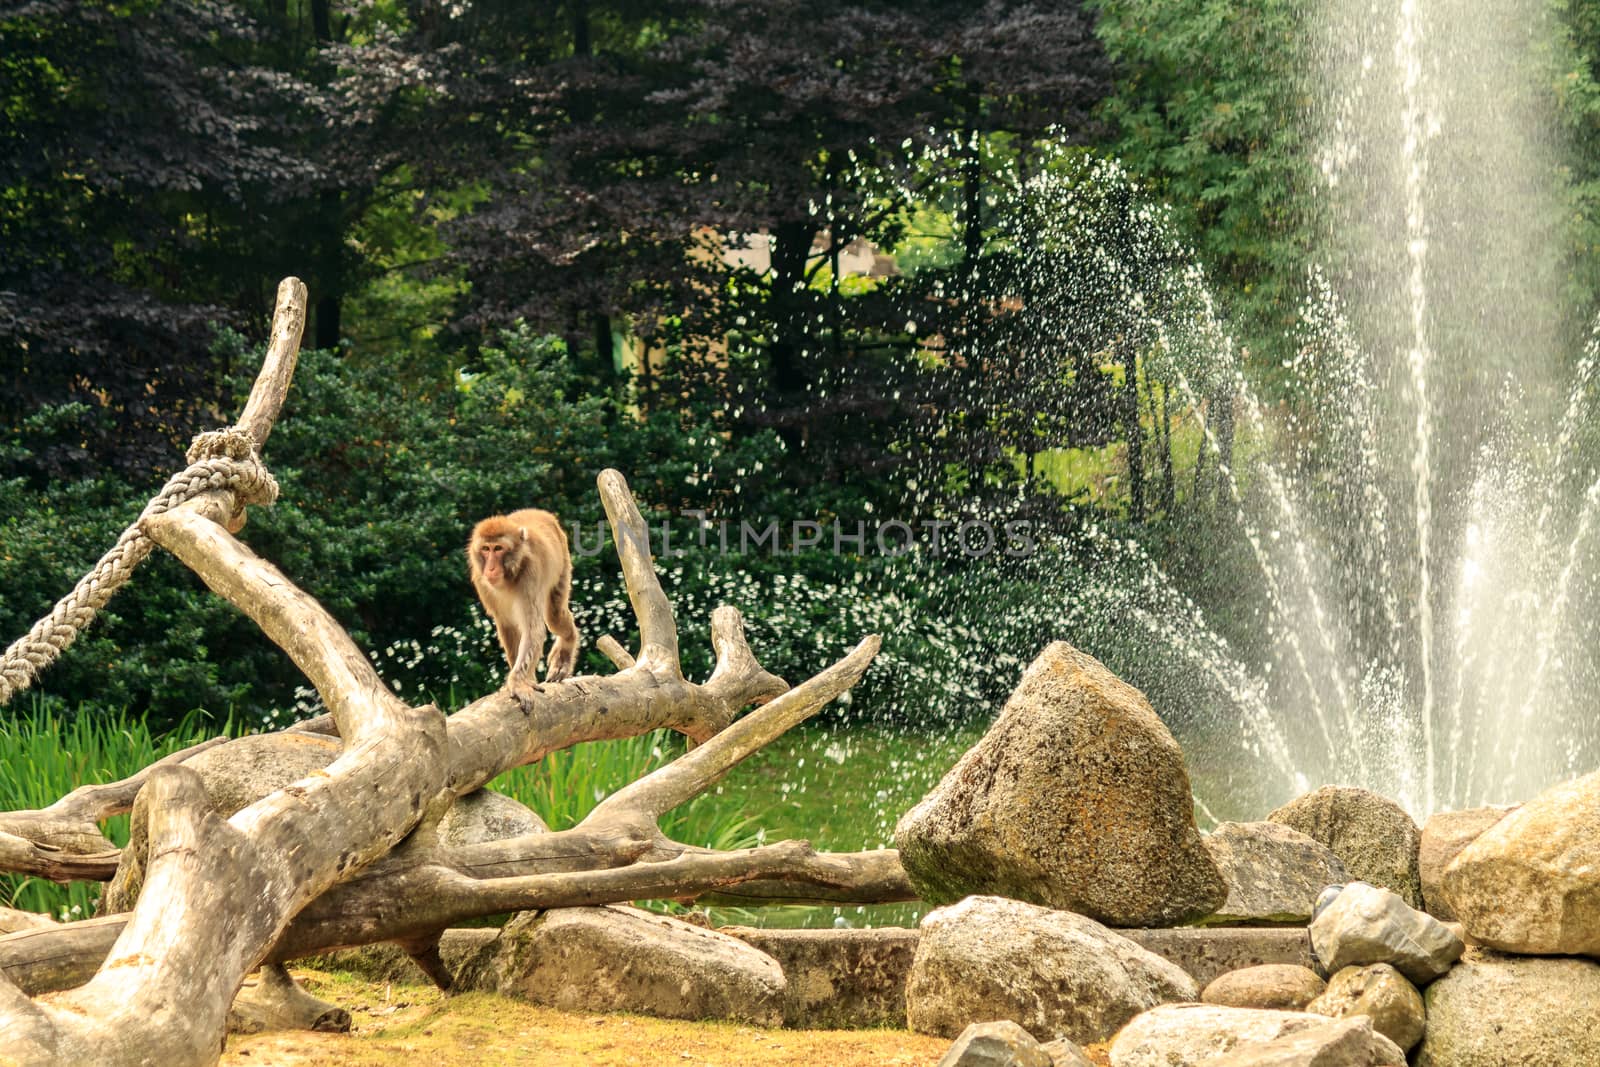 A solitary monkey walks along the top of a branch. There are rocks surrounding the scene and a water fountain in the background